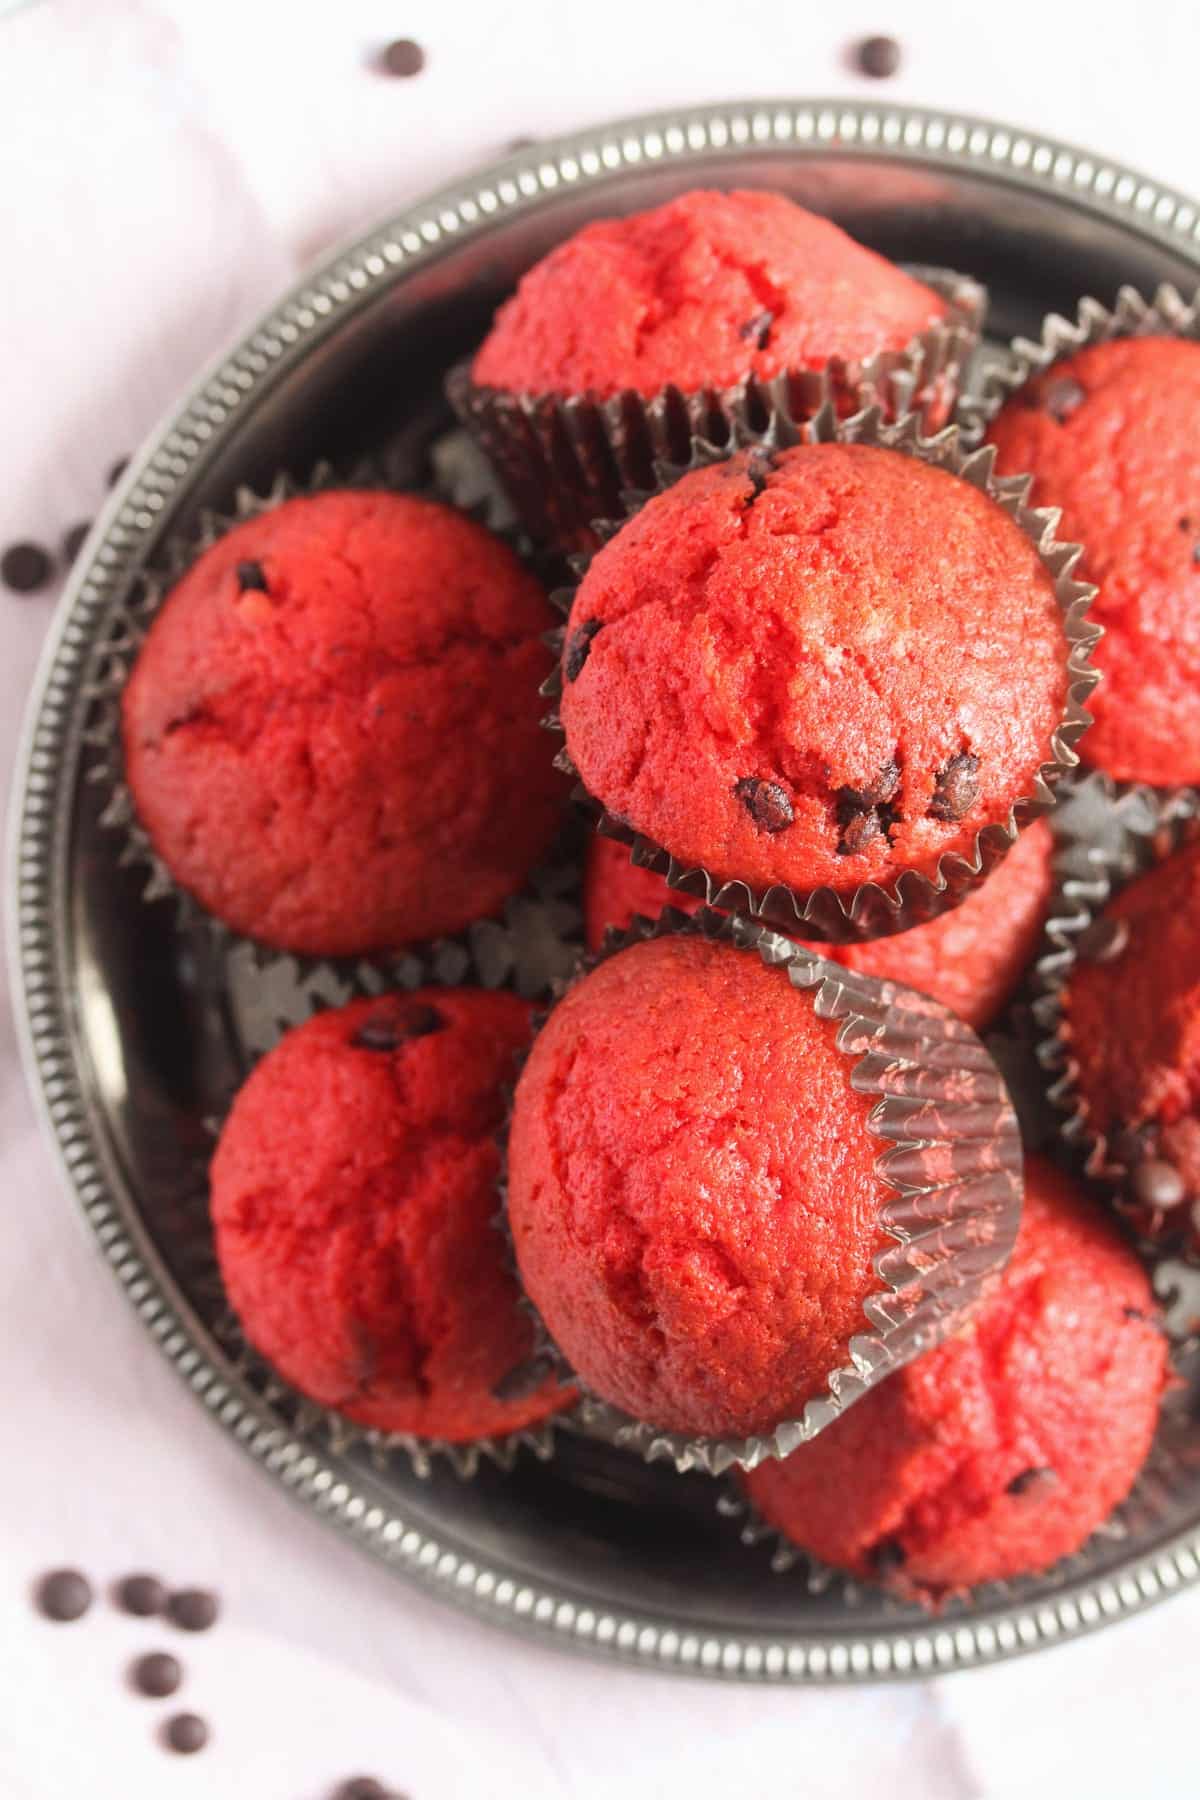 many red velvet muffins on a silver tray overhead view.